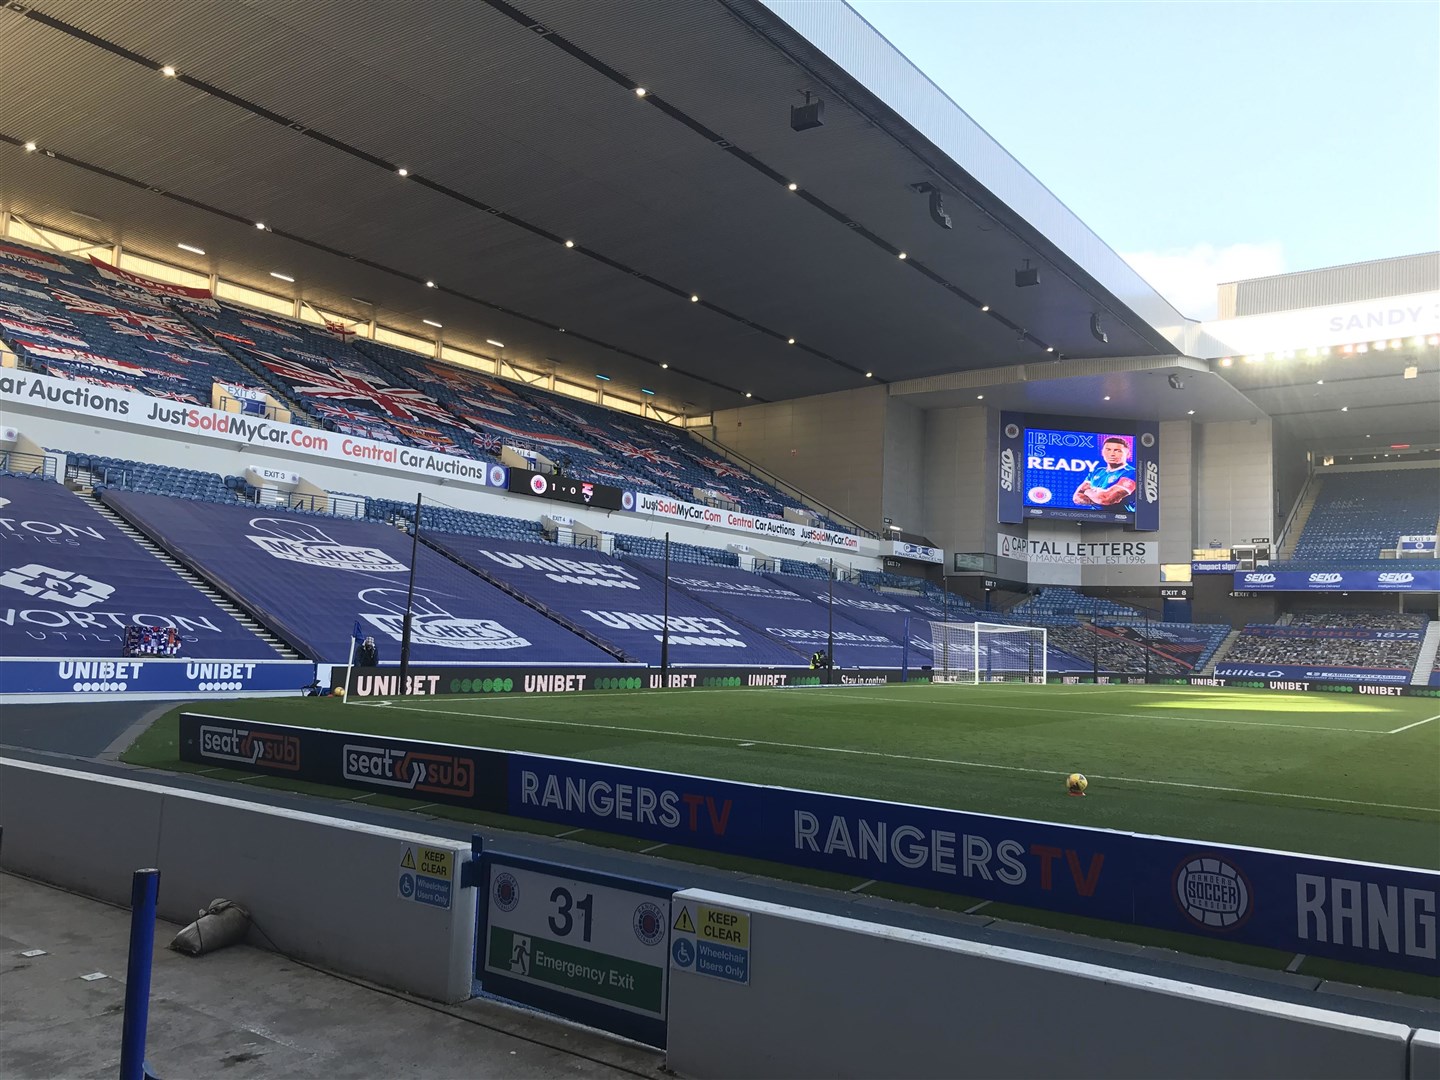 Ross County took on Rangers at Ibrox.